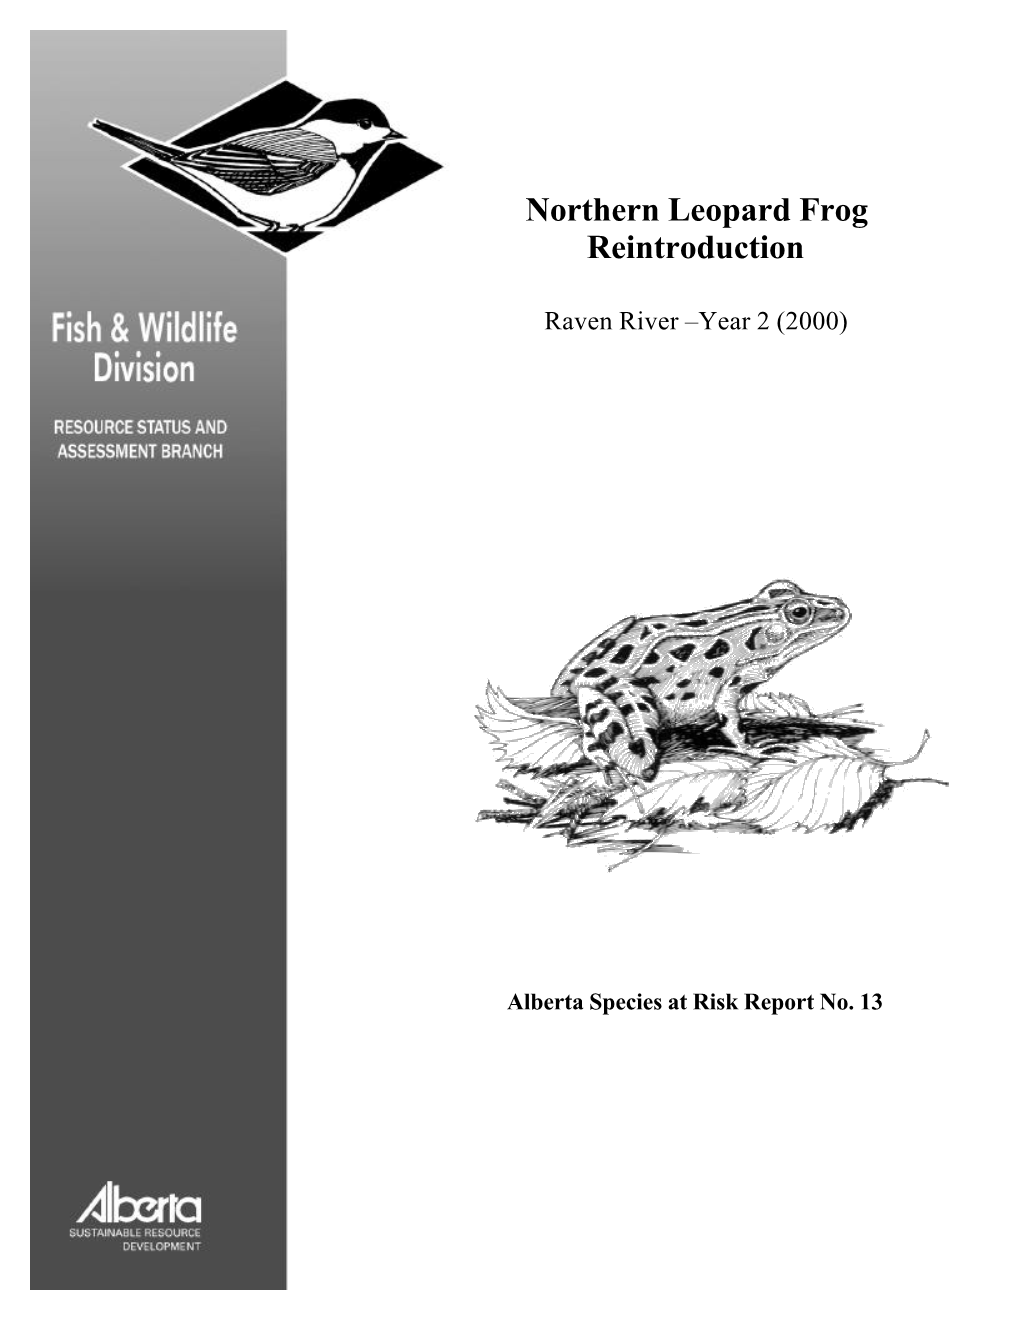 Northern Leopard Frog Reintroduction: Raven River –Year 2 (2000)